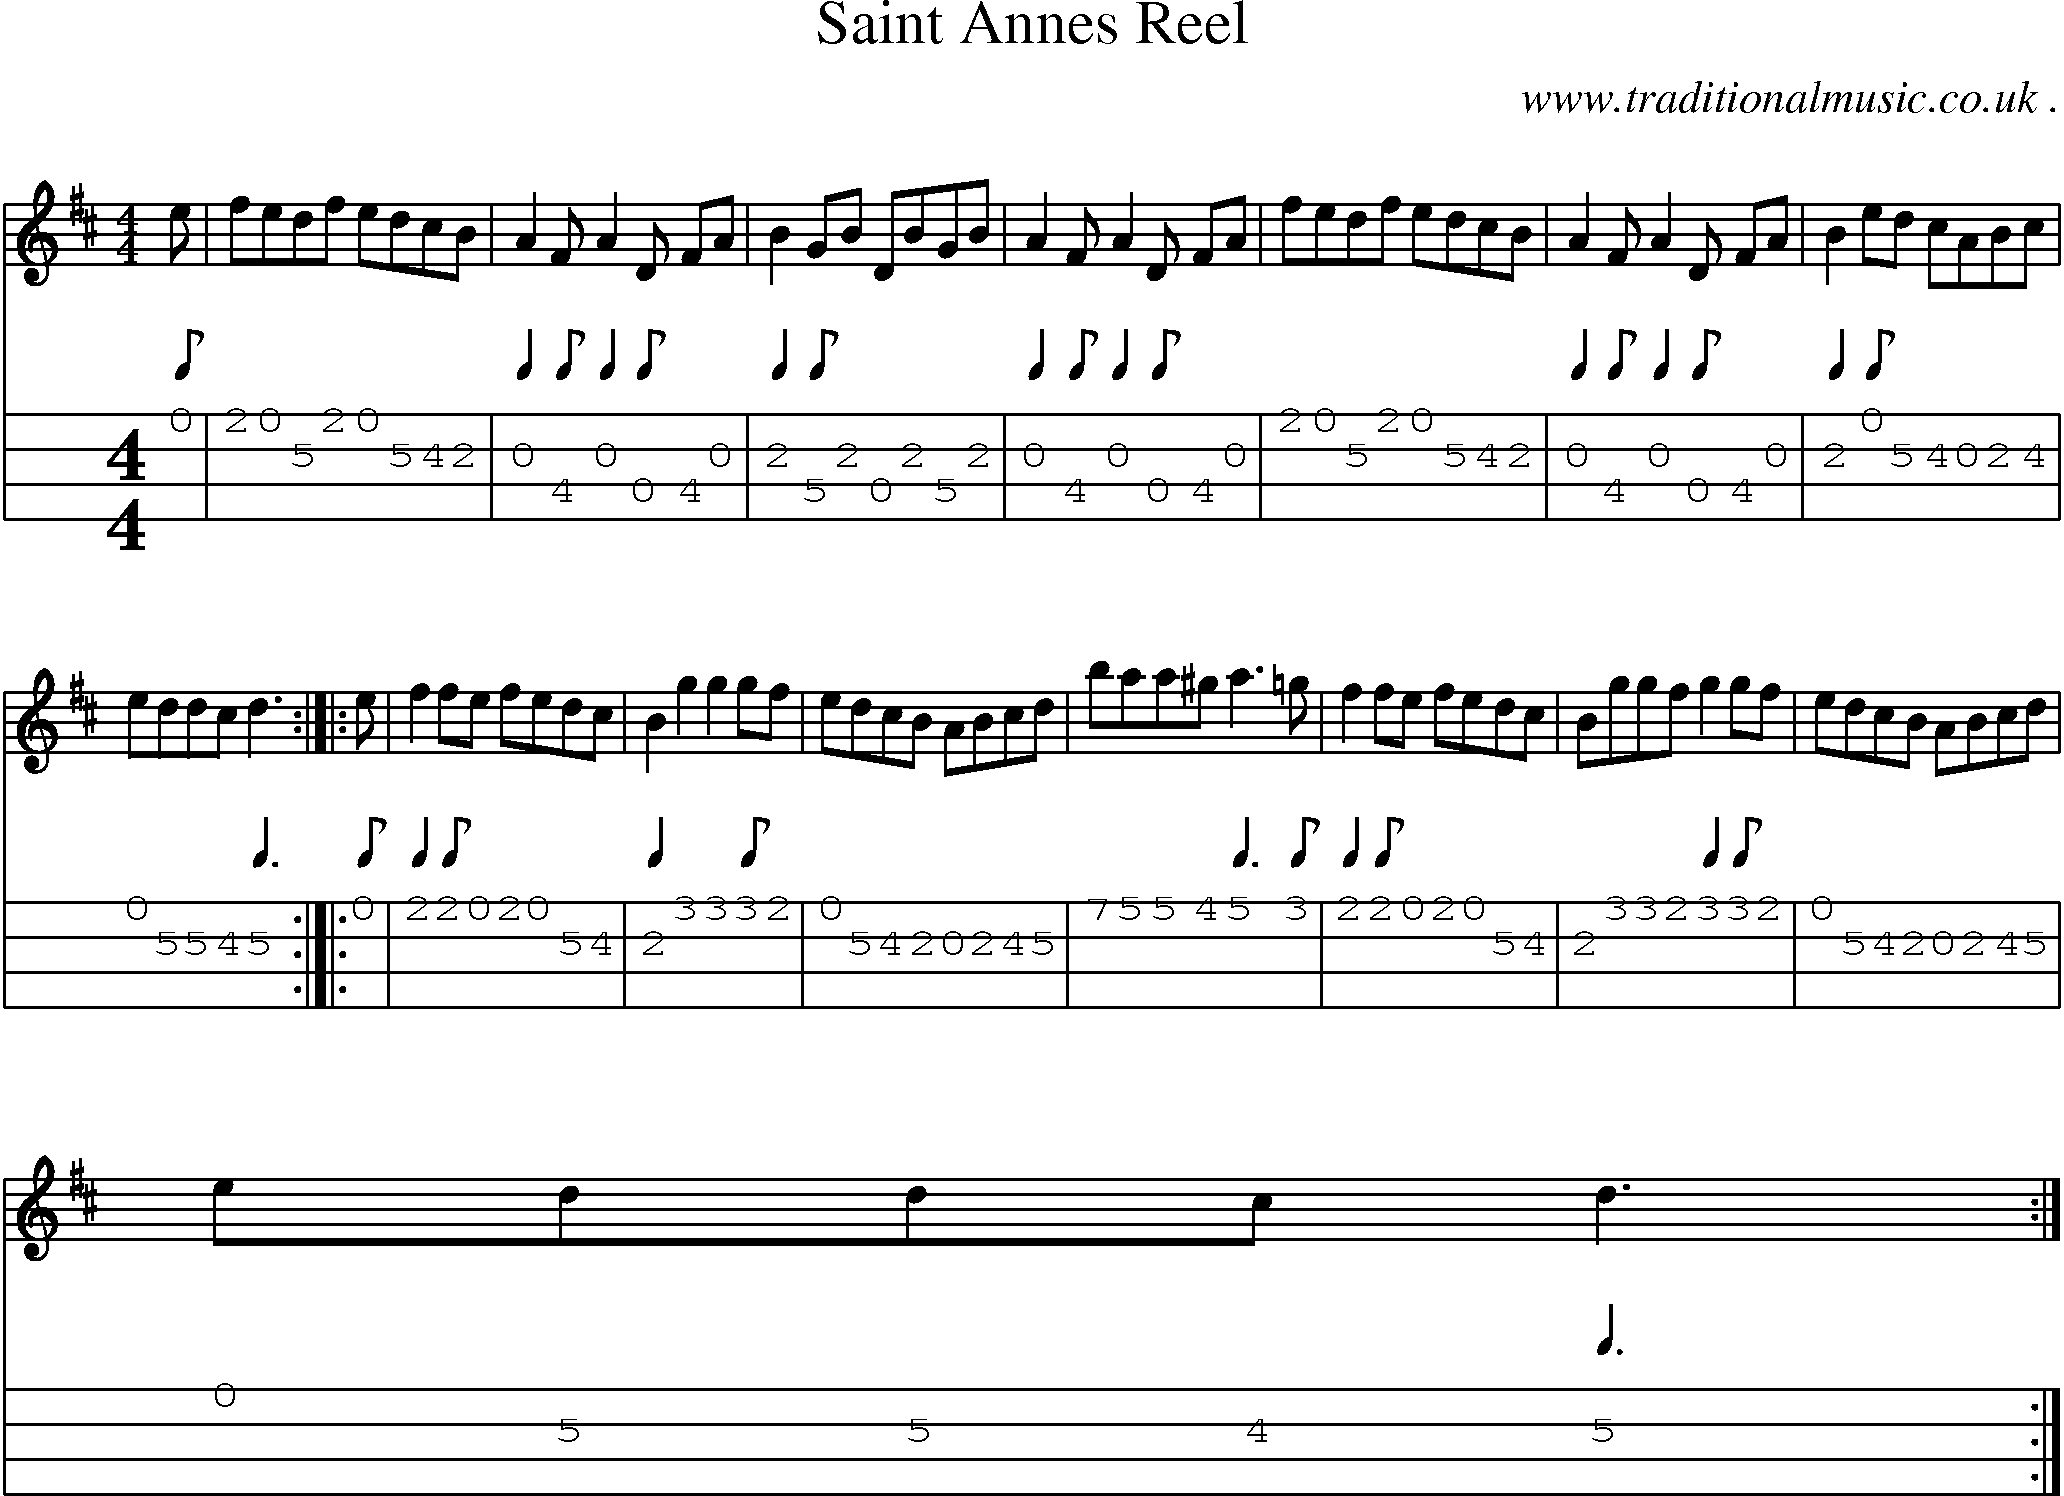 Sheet-music  score, Chords and Mandolin Tabs for Saint Annes Reel